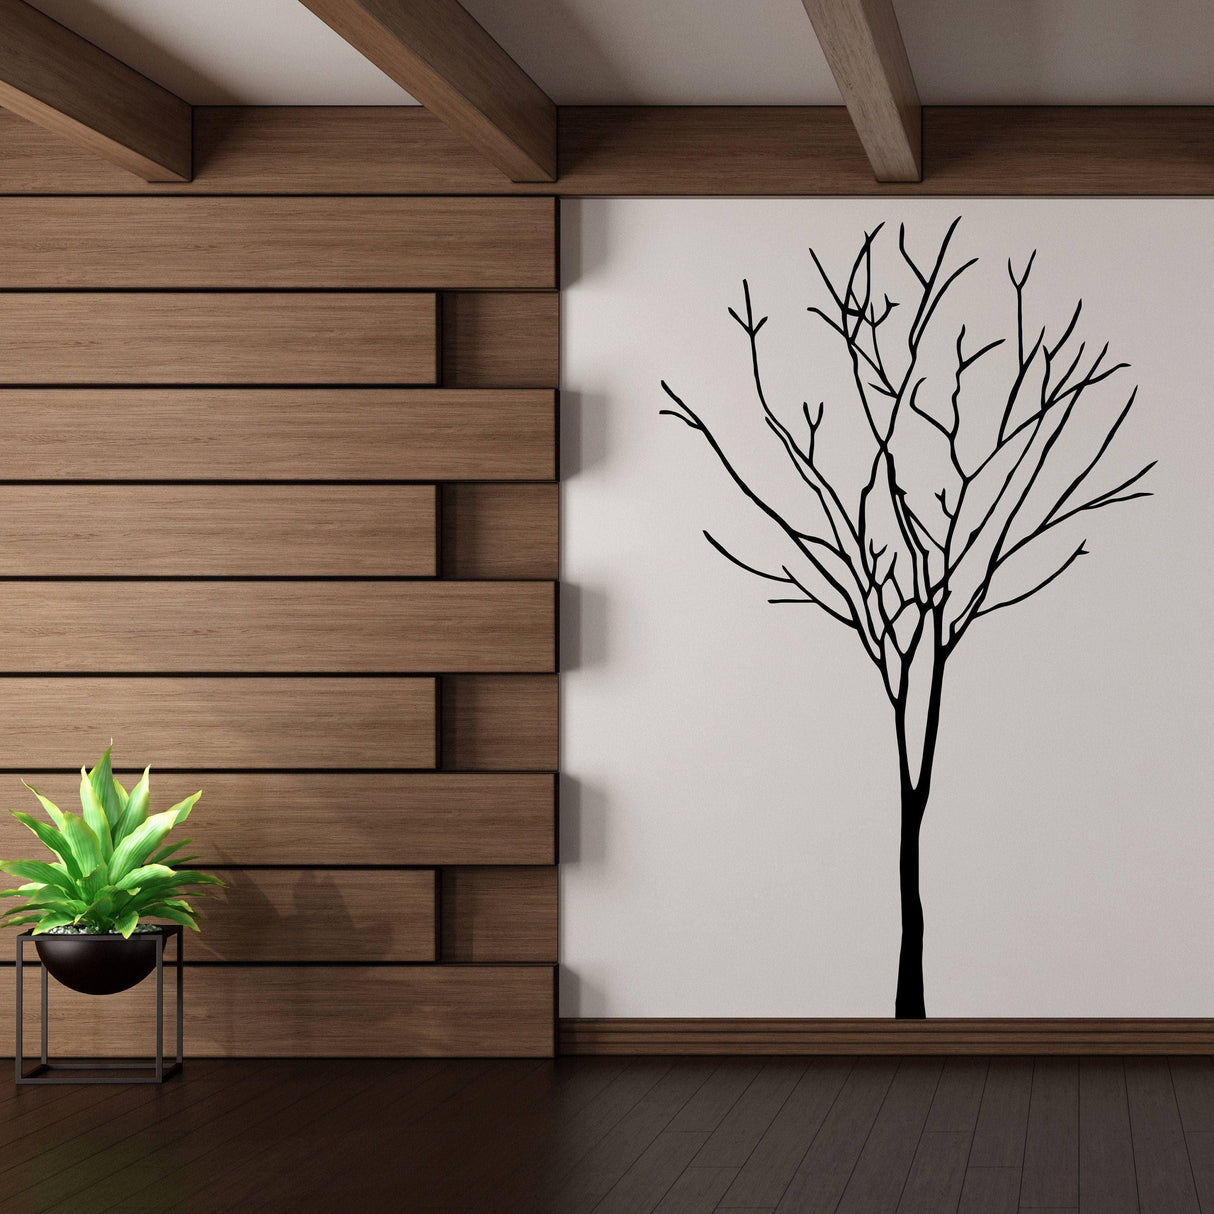 Tree Sticker Decal - Wall Birch Art Vinyl Nursery Stickers - Nature Botanical Trees Decals - Forest Decor Natural Big Winter Peel And Stick - Decords